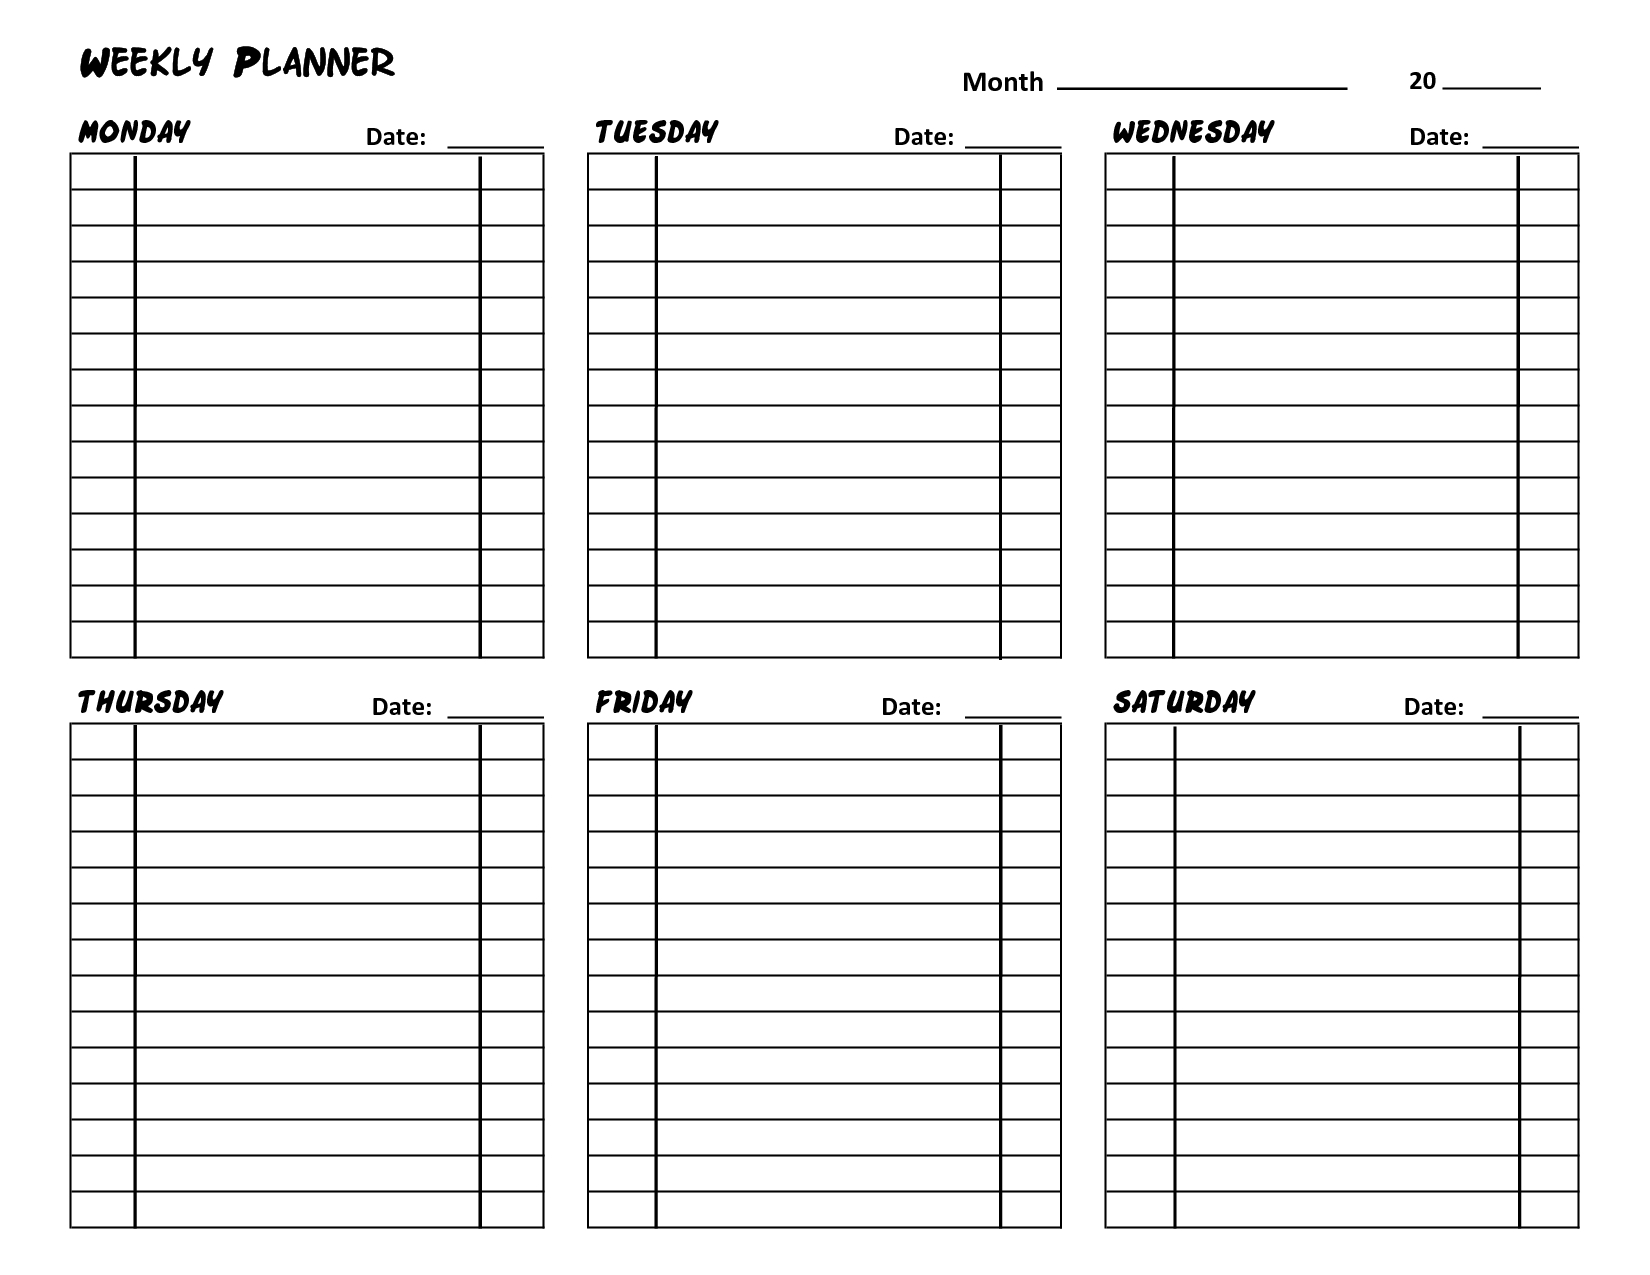 Free Printable Daily Calendar With Time Slots  Template in Weekly Schedule Template With Time Slots